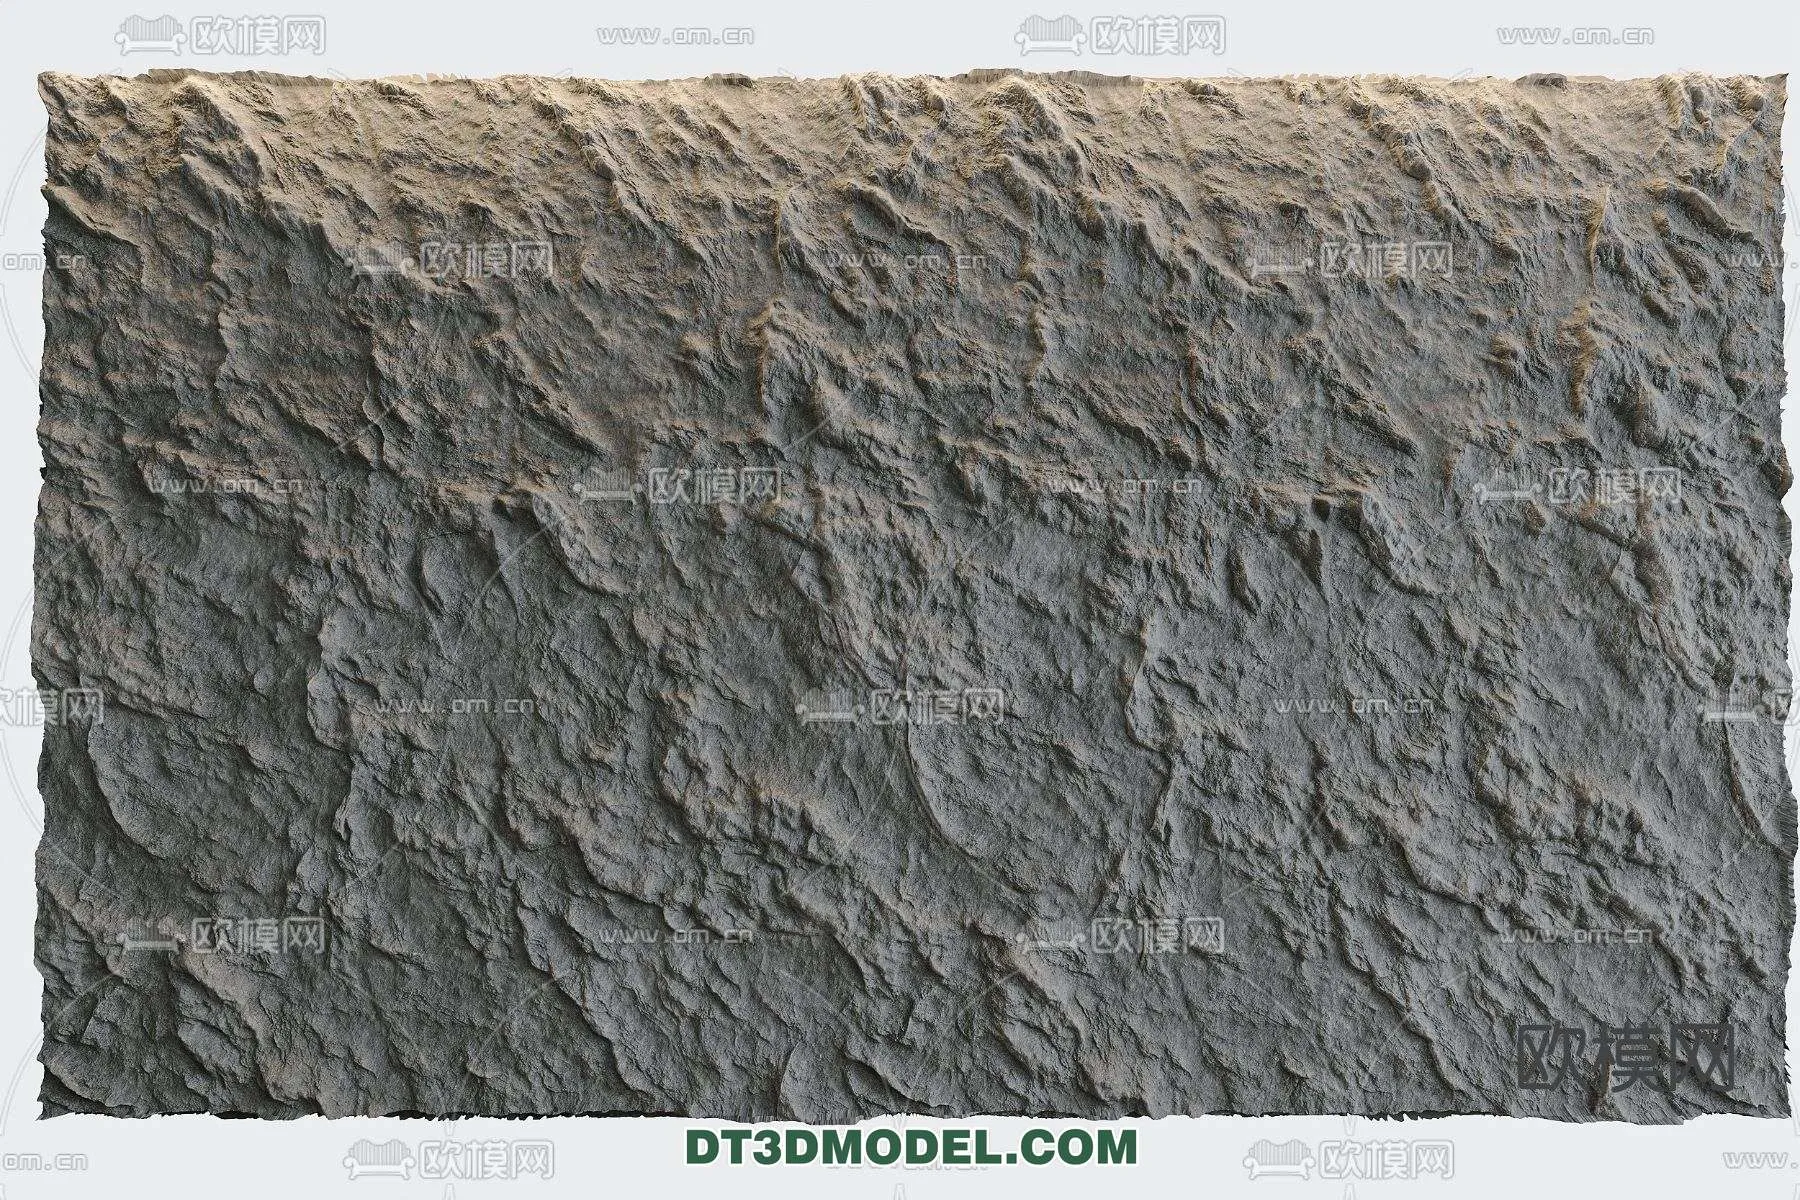 MATERIAL – TEXTURES – ROCK WALL – 0063